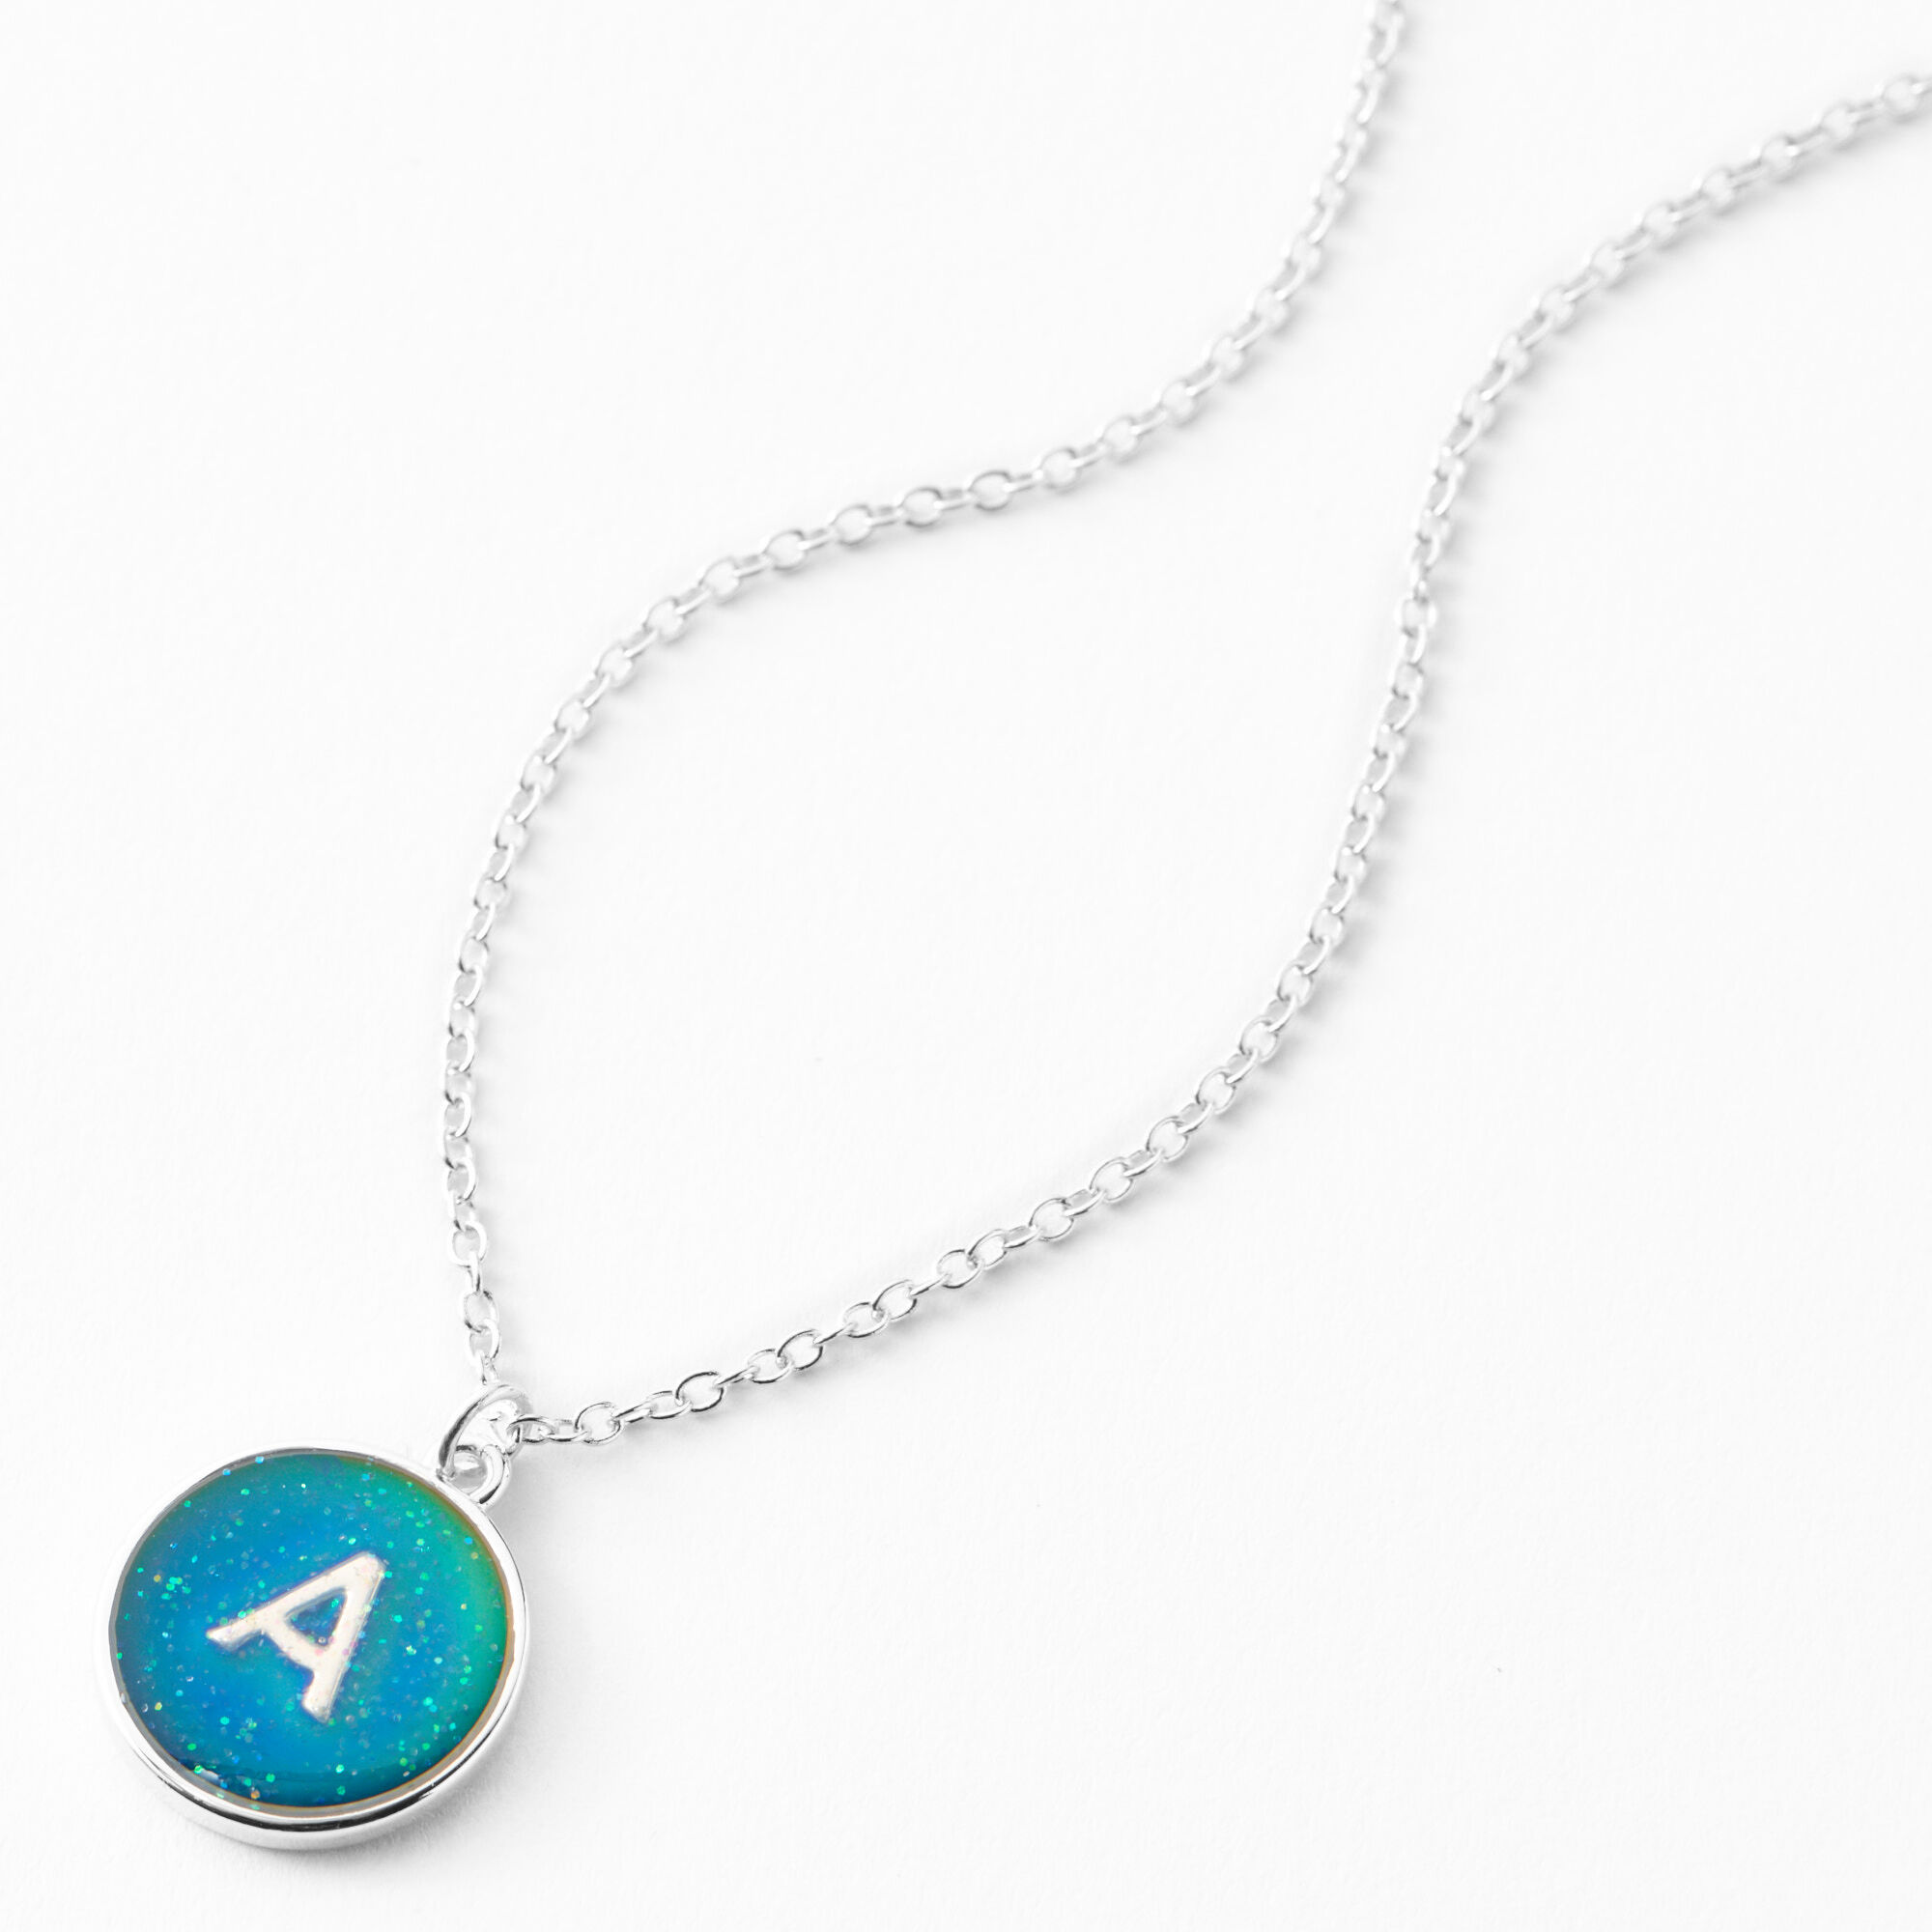 Mood Pendant Necklace Cute Butterfly Choker Colored Mood Change Friendship  Graduation Gifts for Girls, Sisters, Women - Walmart.com